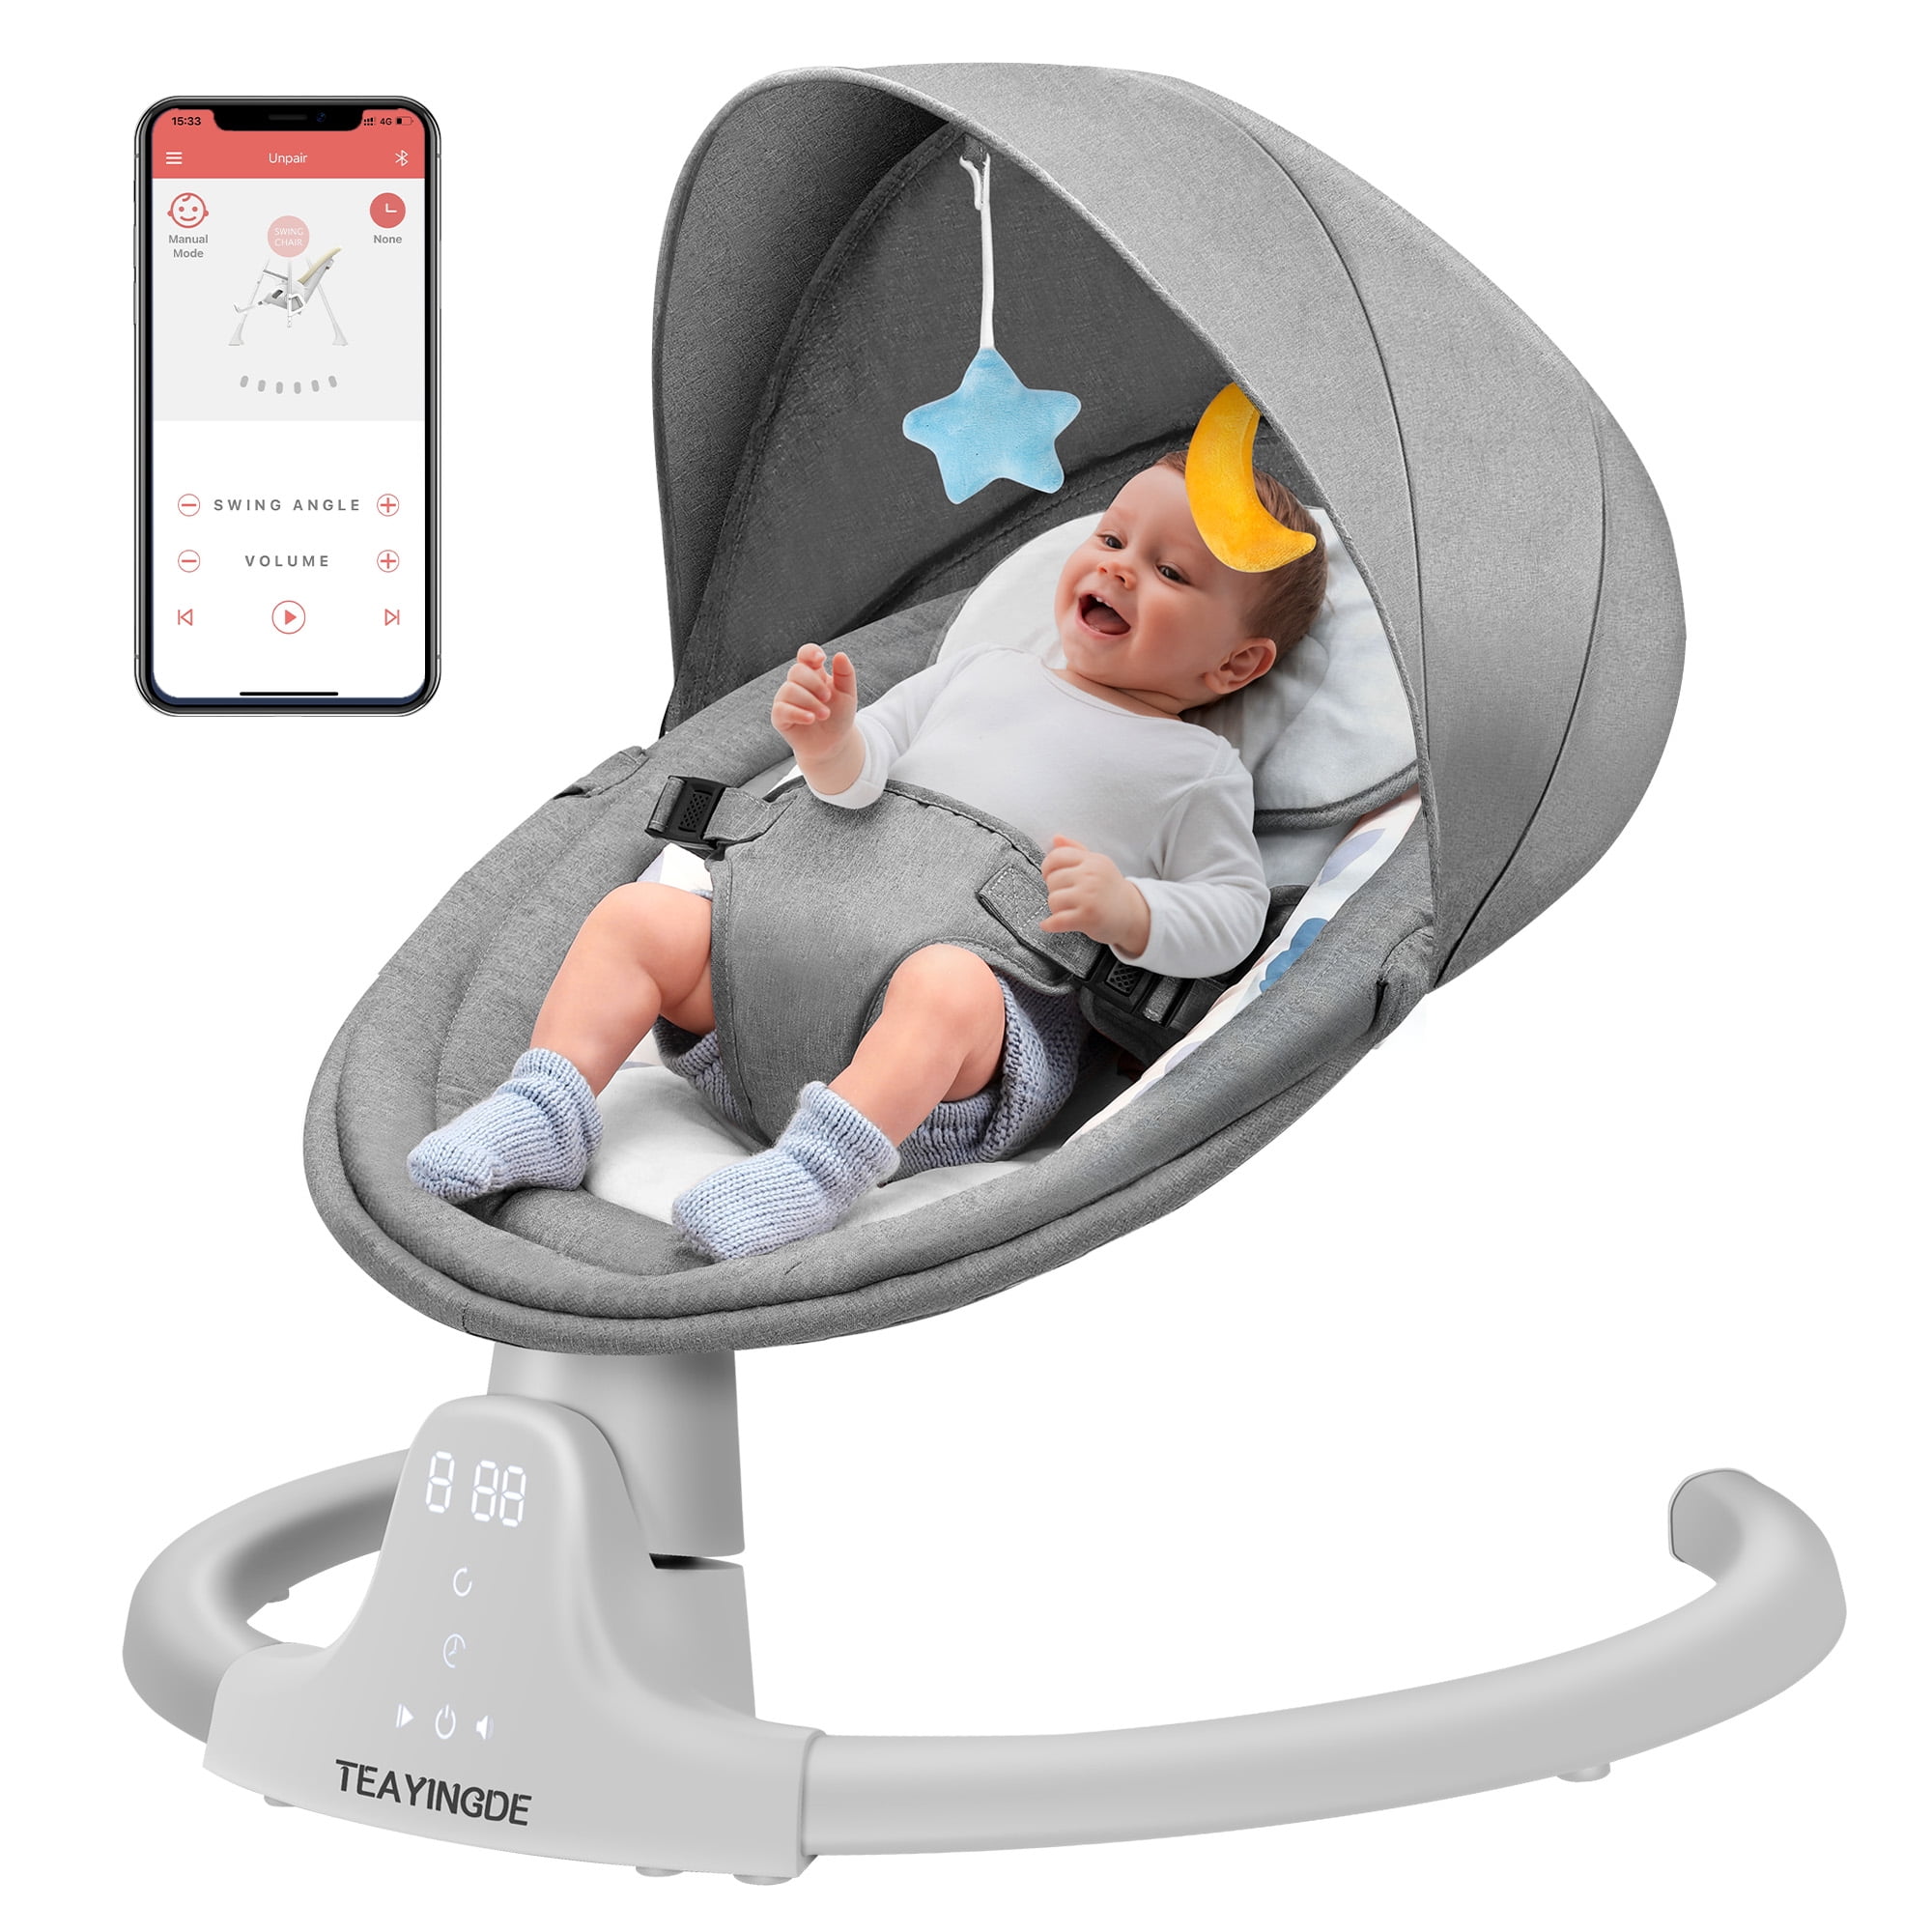 TEAYINGDE Baby Swing for Infants, APP Remote Bluetooth Control, Compact & Portable, 5 Speed, 10 Lullabies, USB Plug-in Power, Indoor/Outdoor, 5-20 lb, 0-12 Months (Gray)